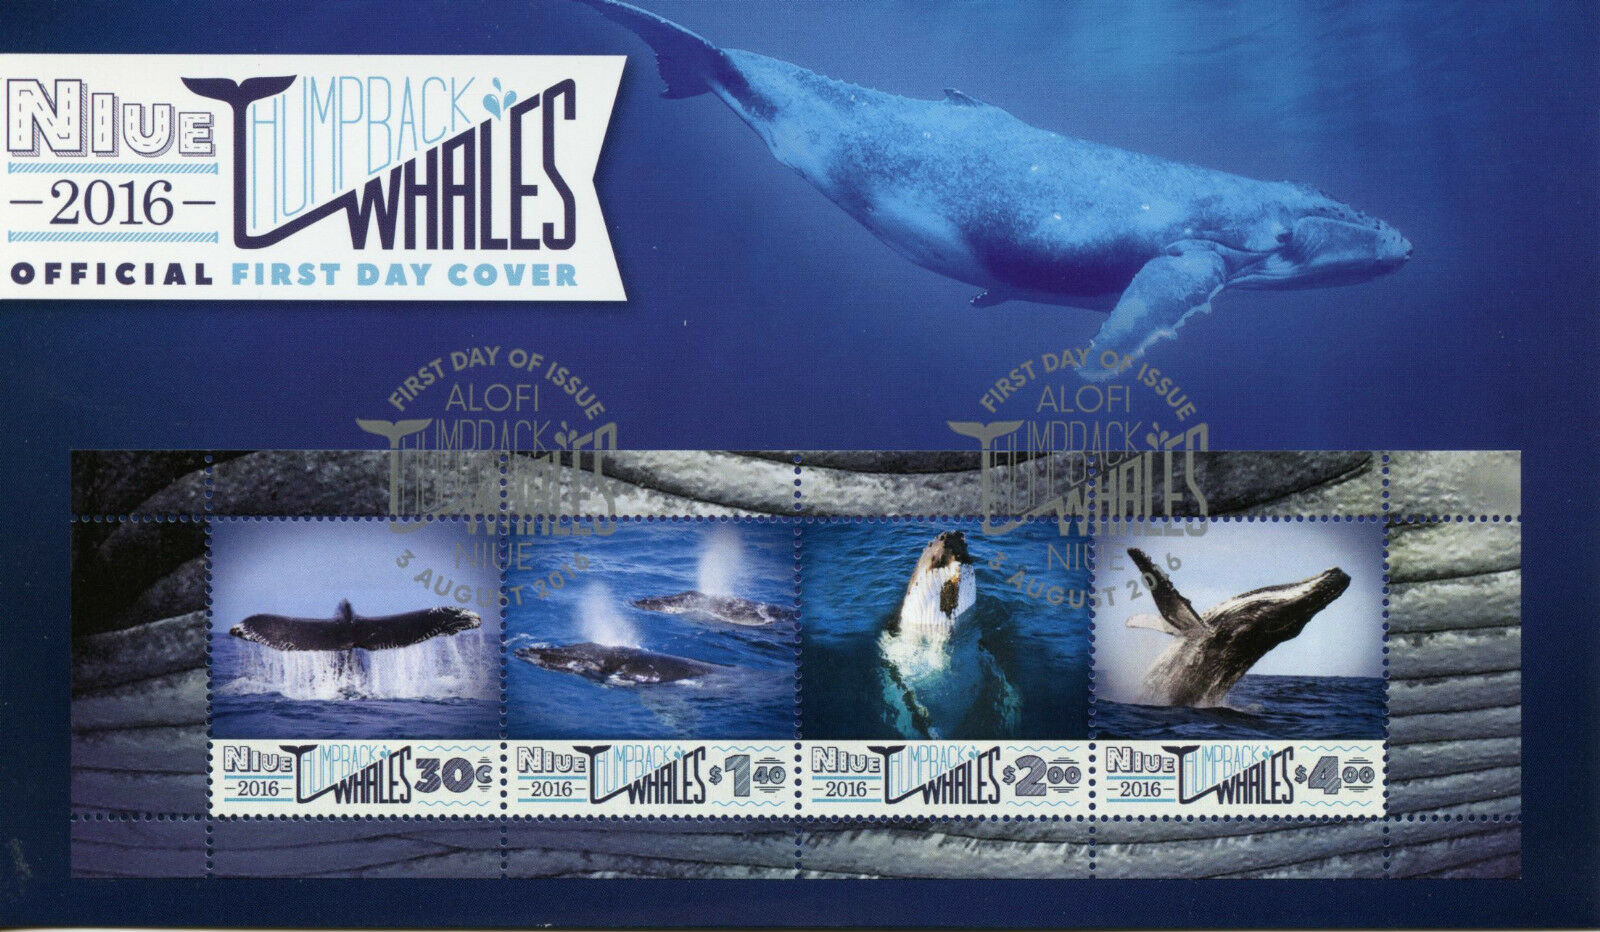 Niue 2016 FDC Humpback Whales 4v M/S Cover Marine Mammals Animals Whale Stamps